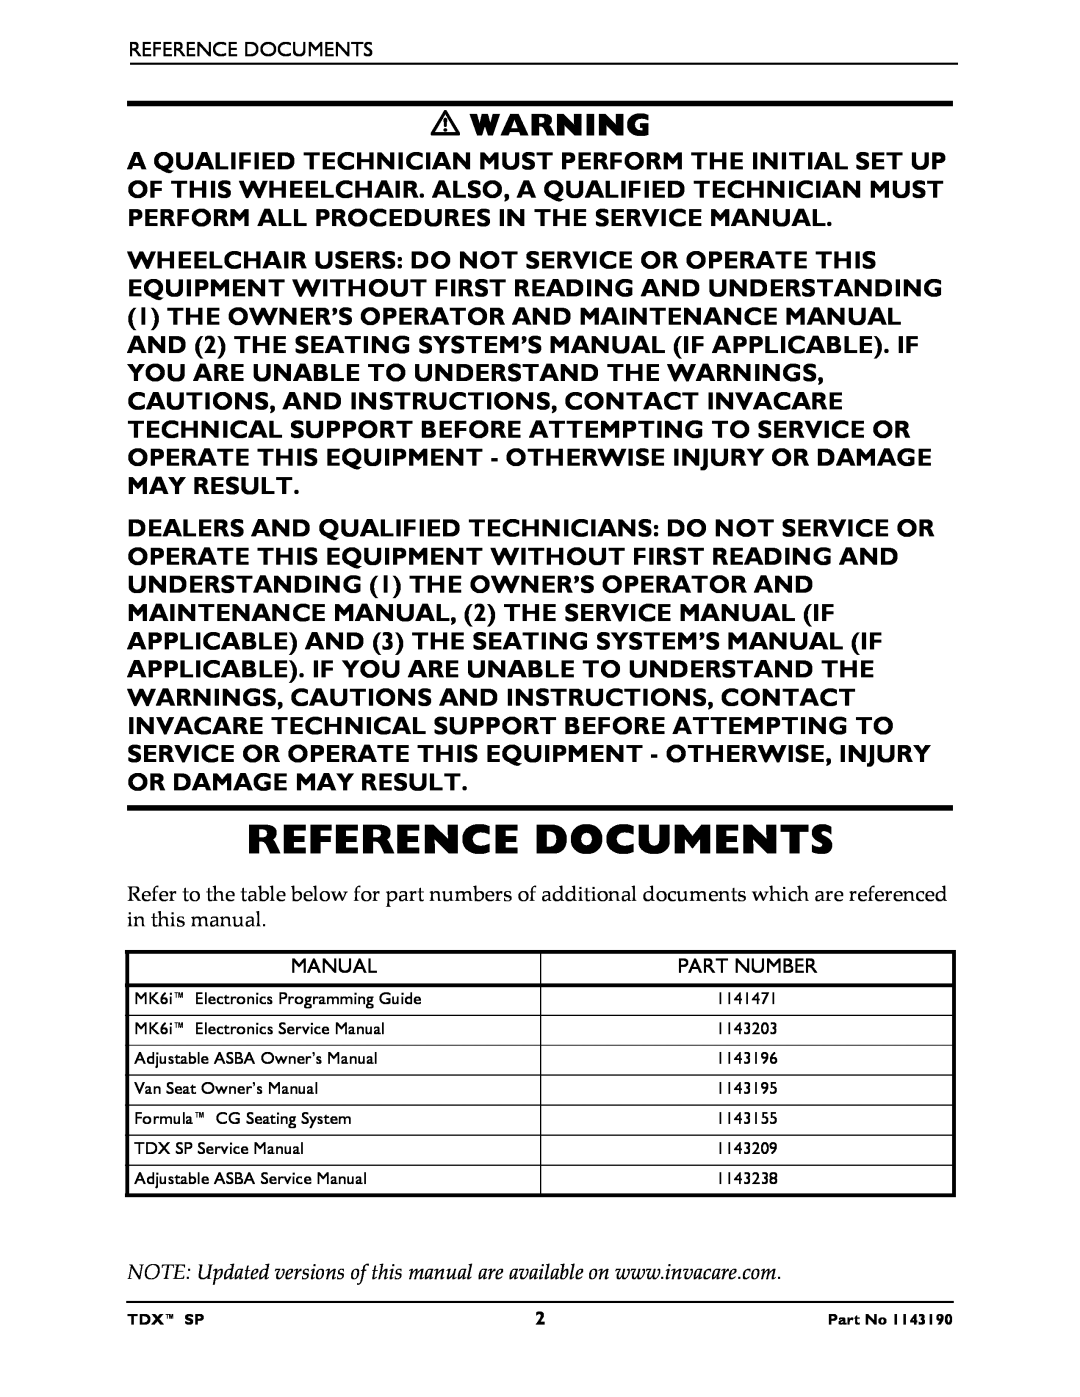 Invacare SP manual Reference Documents, Manual 